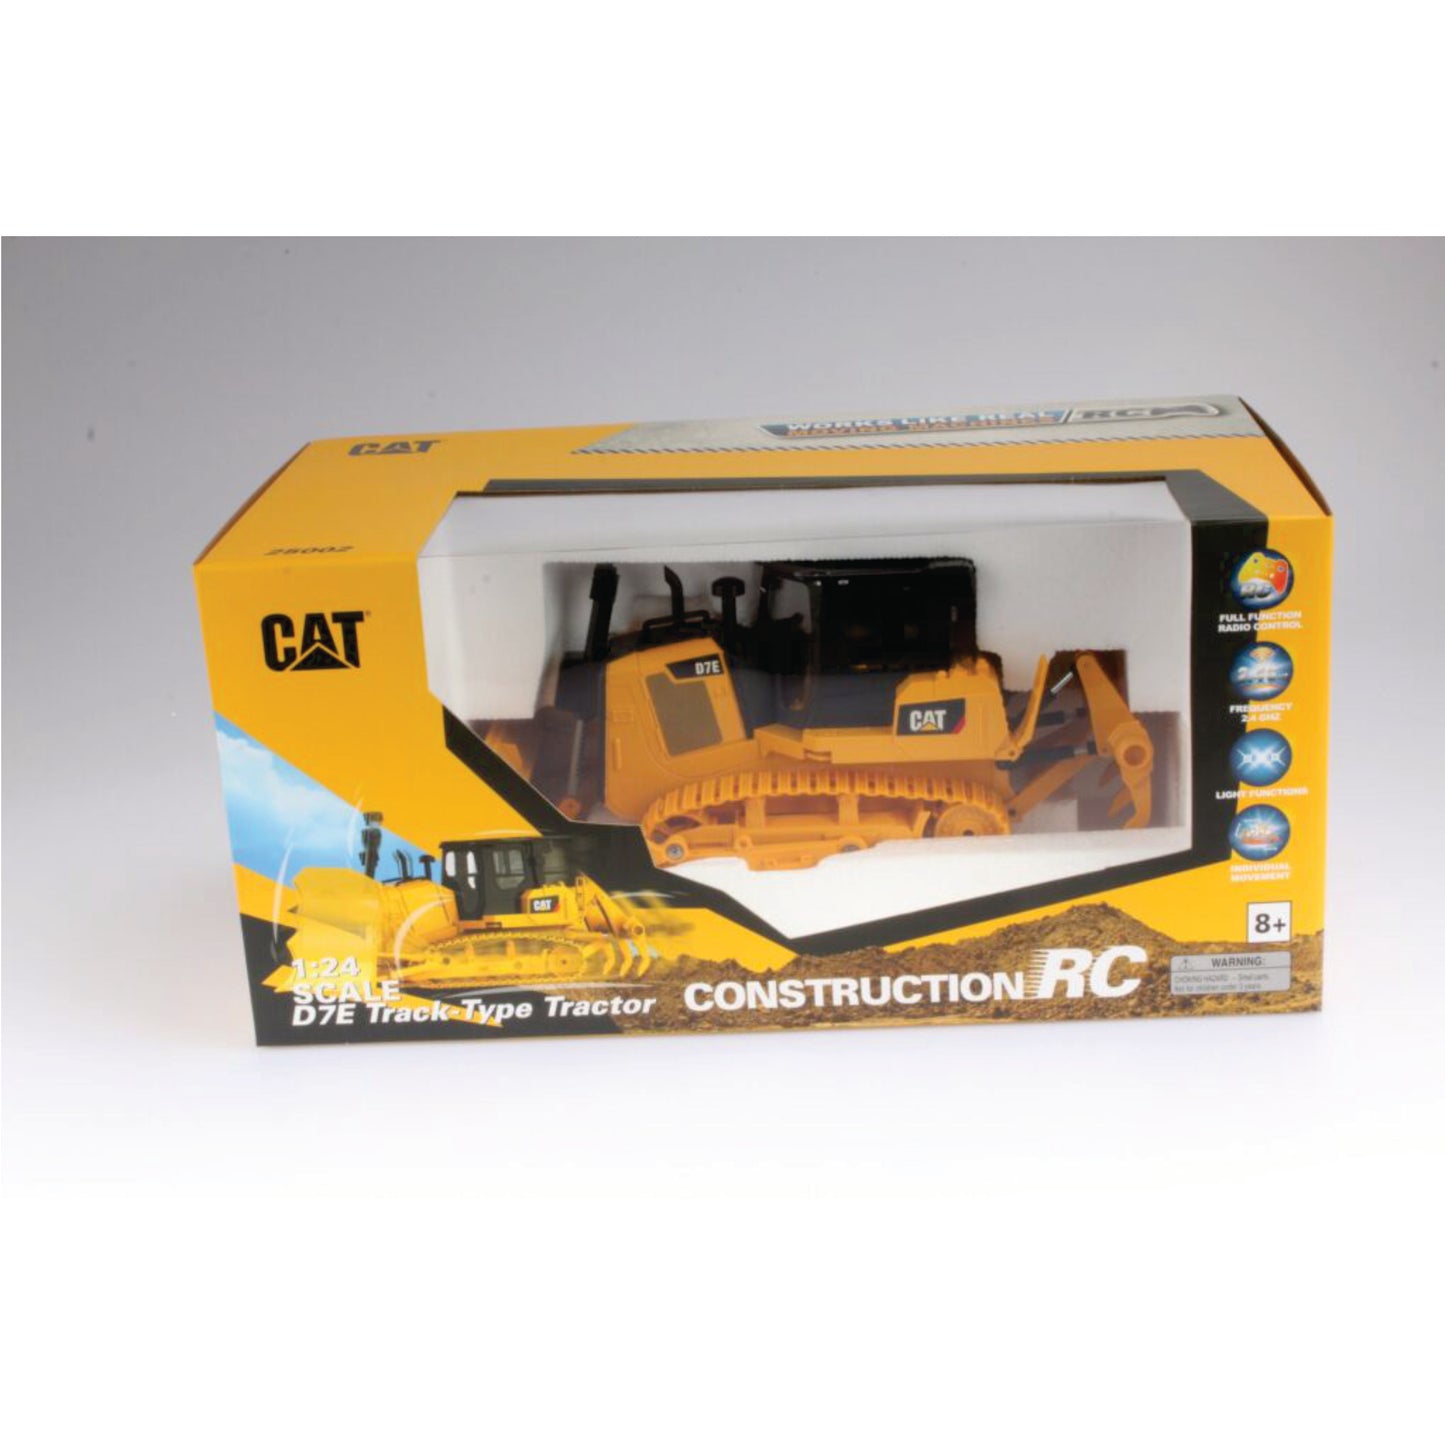 Cat 1:24 scale Remote Controlled D7E Track-Type Tractor